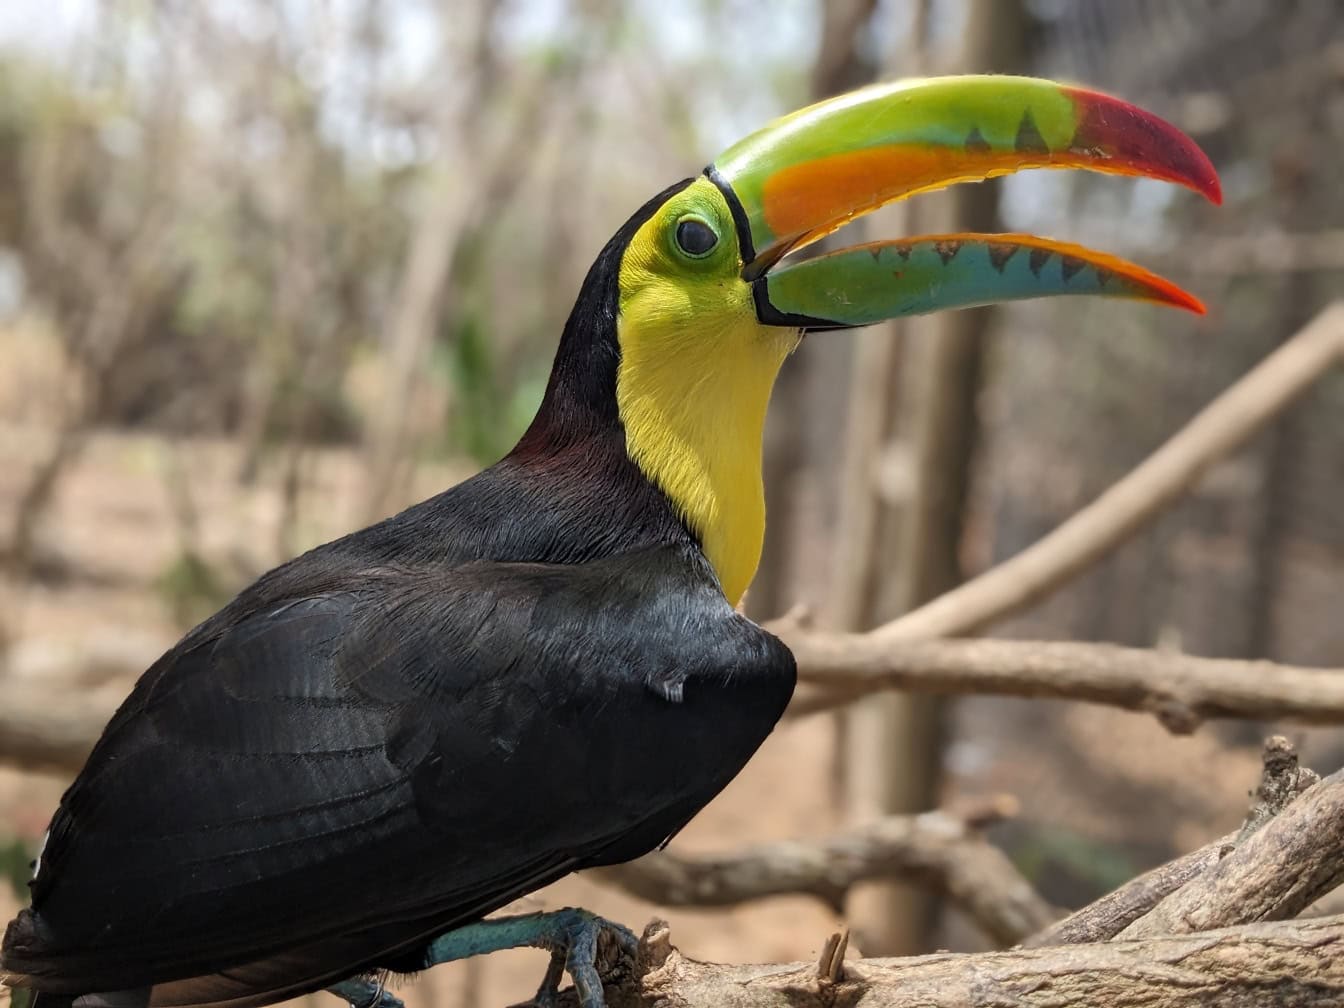 The keel-billed toucan, also known as sulfur-breasted toucan (Ramphastos sulfuratus)